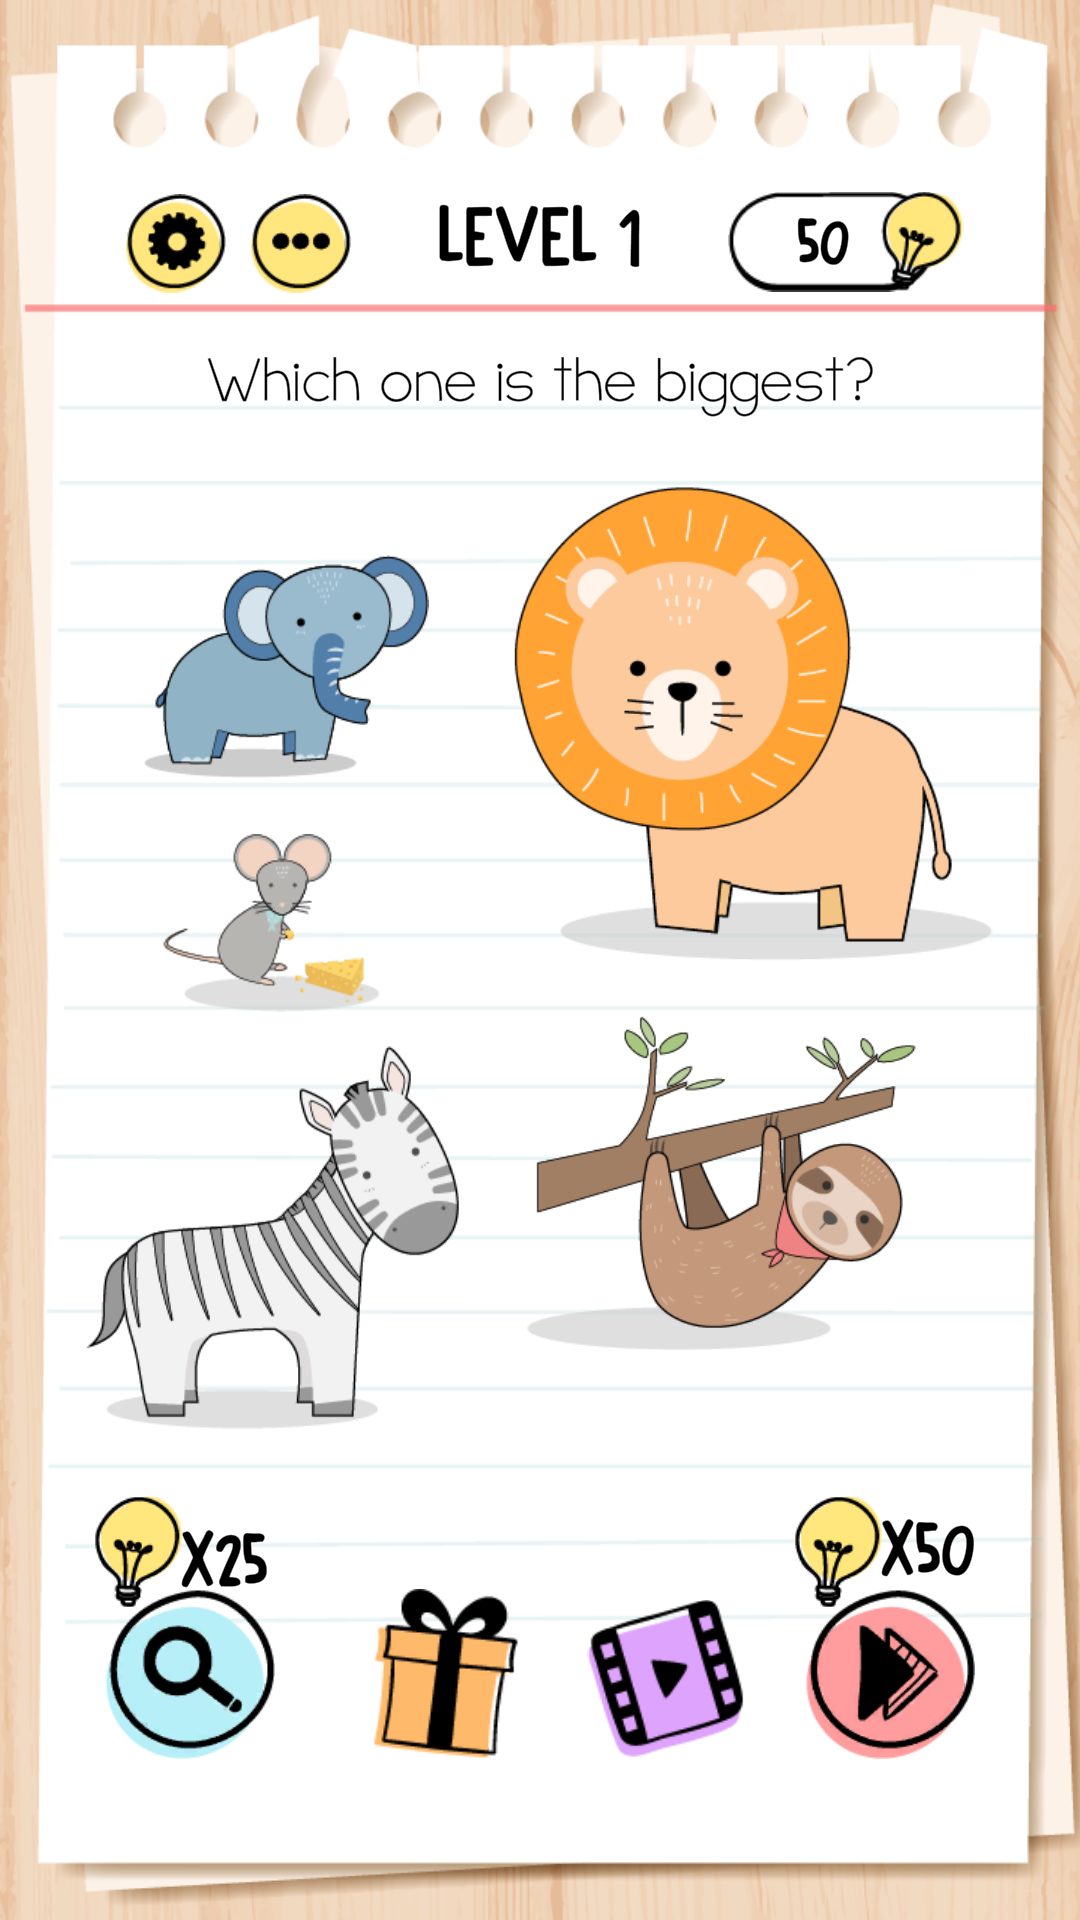 download the new version for iphoneBrain Test : Tricky Puzzles